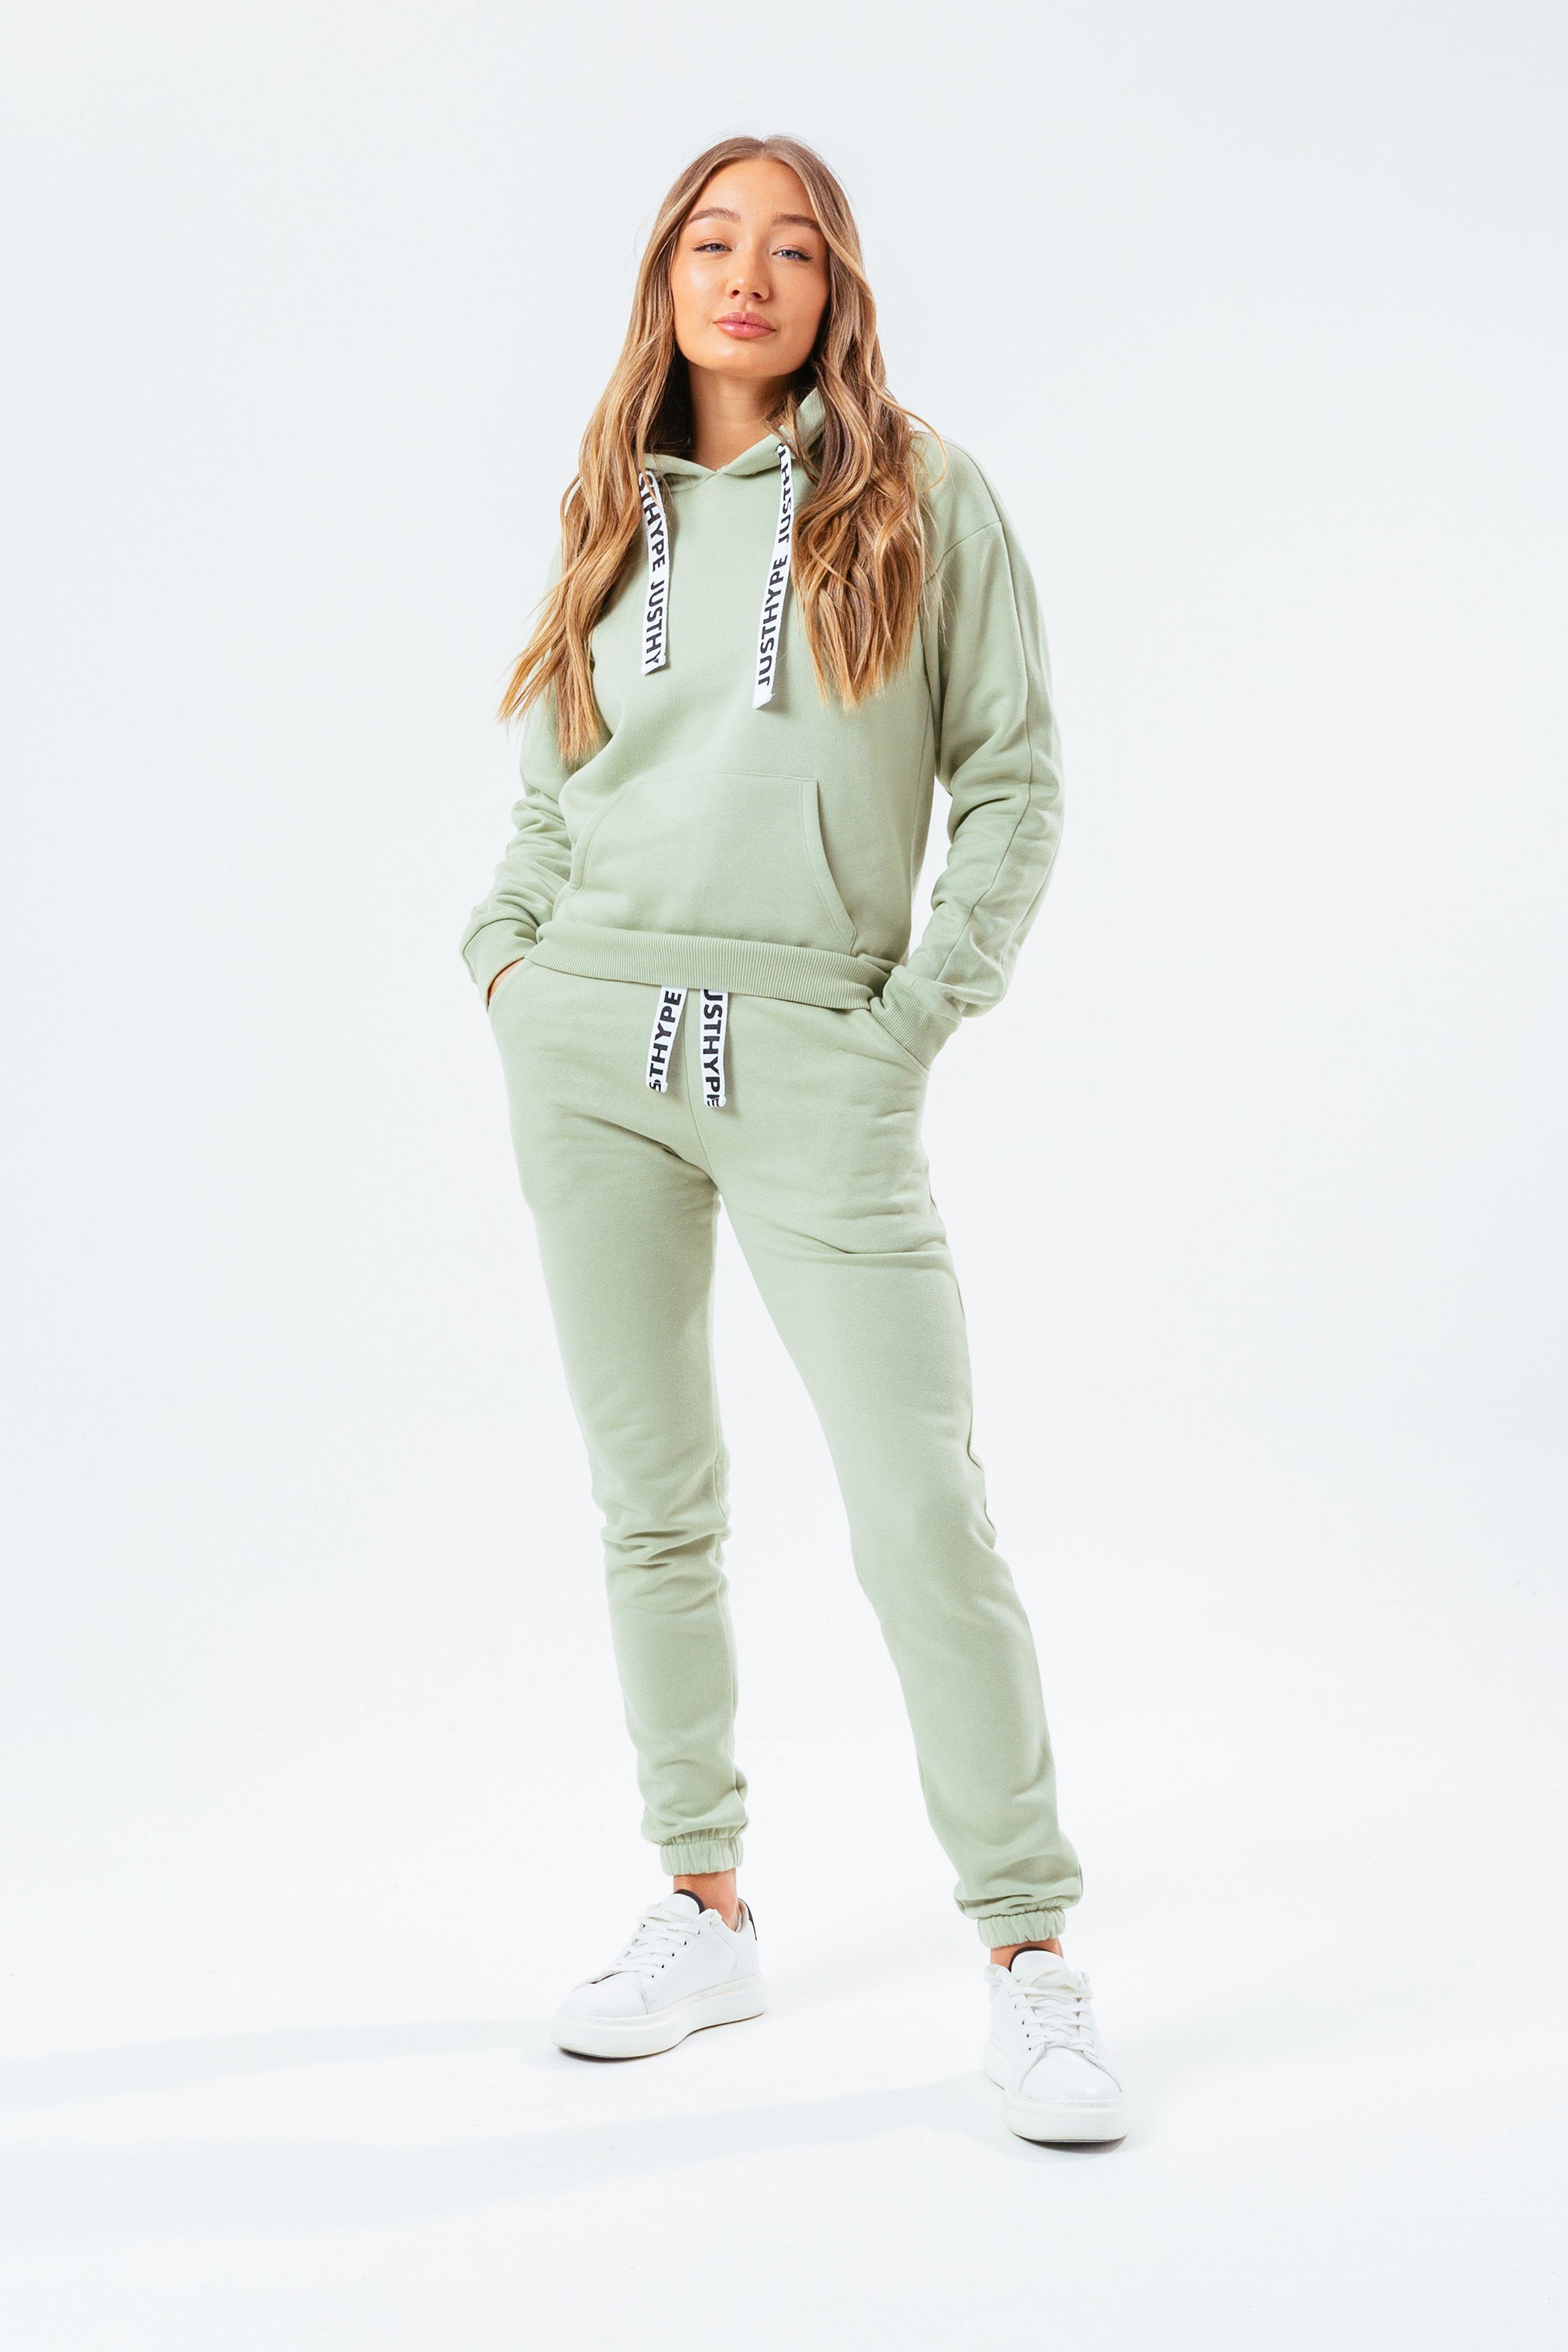 Introducing the HYPE. Olive Oversized Women's Pullover Hoodie, designed in a pastel mint colour palette. In our oversized women's hoodie shape, in a 80% cotton and 20% polyester fabric for the ultimate comfort. With a fixed hood, fitted hem and cuffs, kangaroo pocket and embossed monochrome drawstring pullers. Wear with the matching joggers for your next loungewear look. Machine washable.